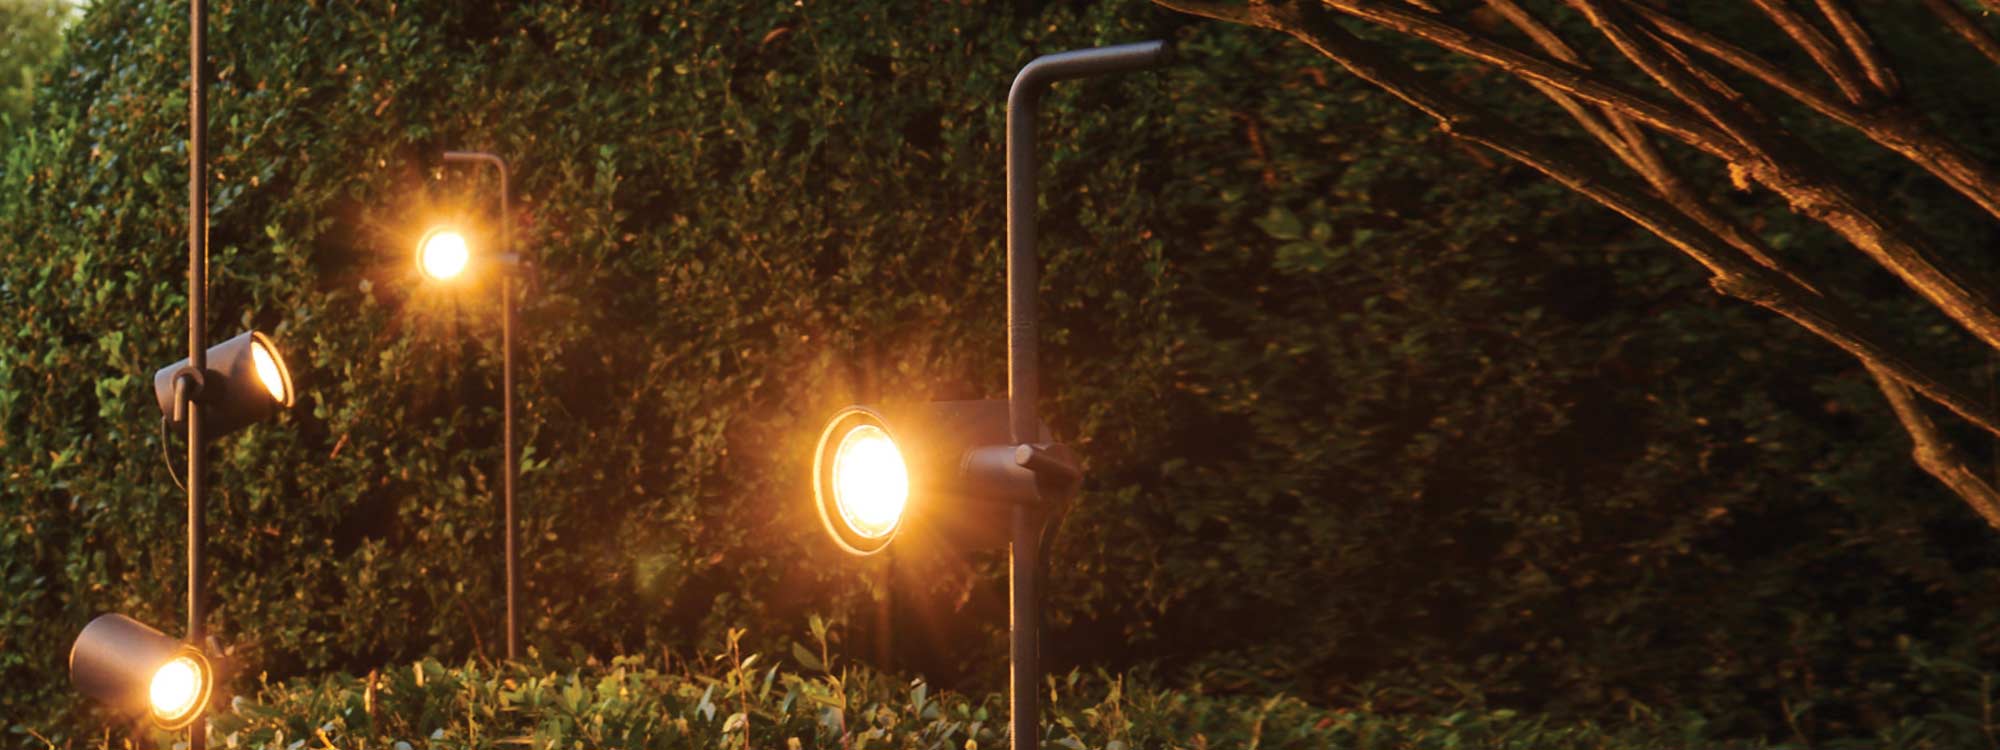 Image of 3 Royal Botania Spotty post outdoor spotlights orientated in different directions in a nighttime garden